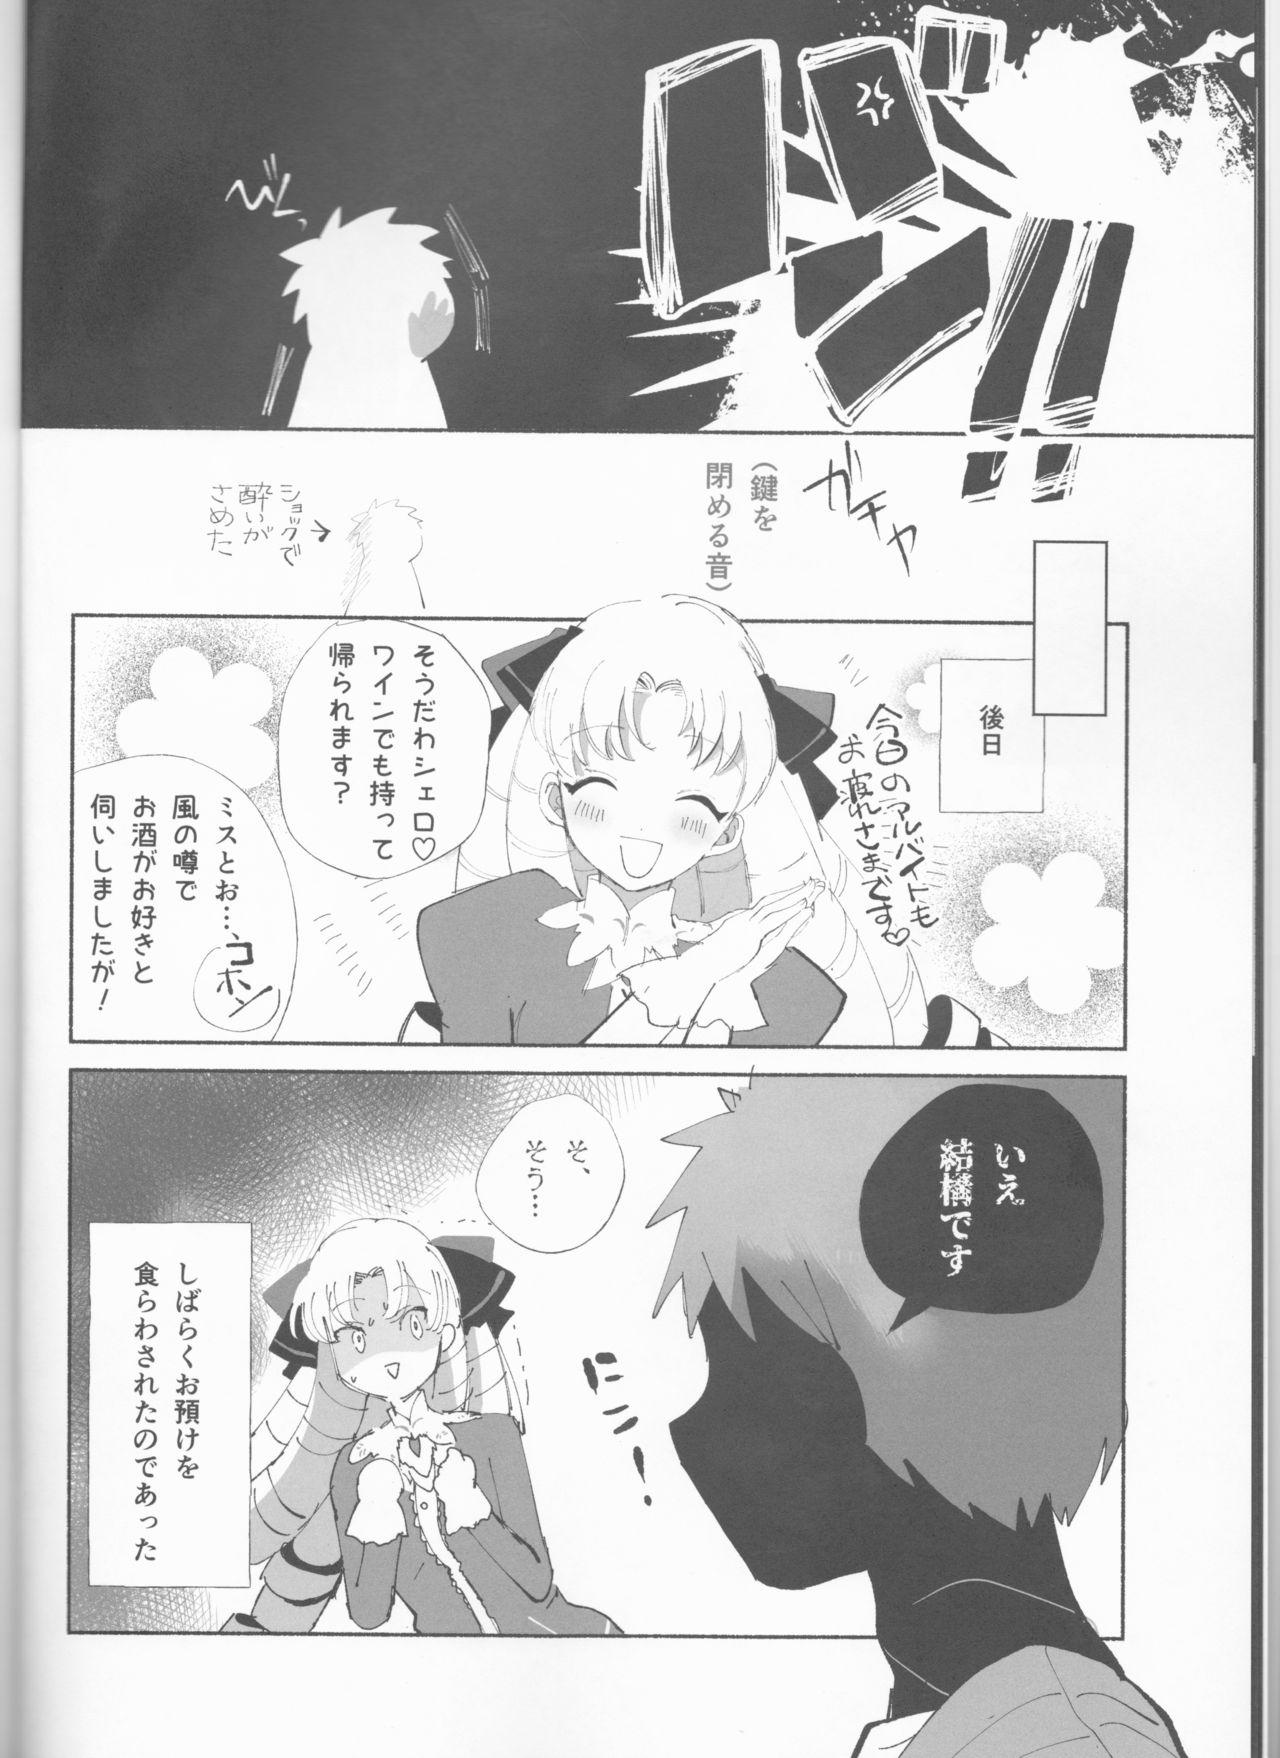 Publico TRAUMEREI(Fate/stay night] - Fate stay night Handjobs - Page 9